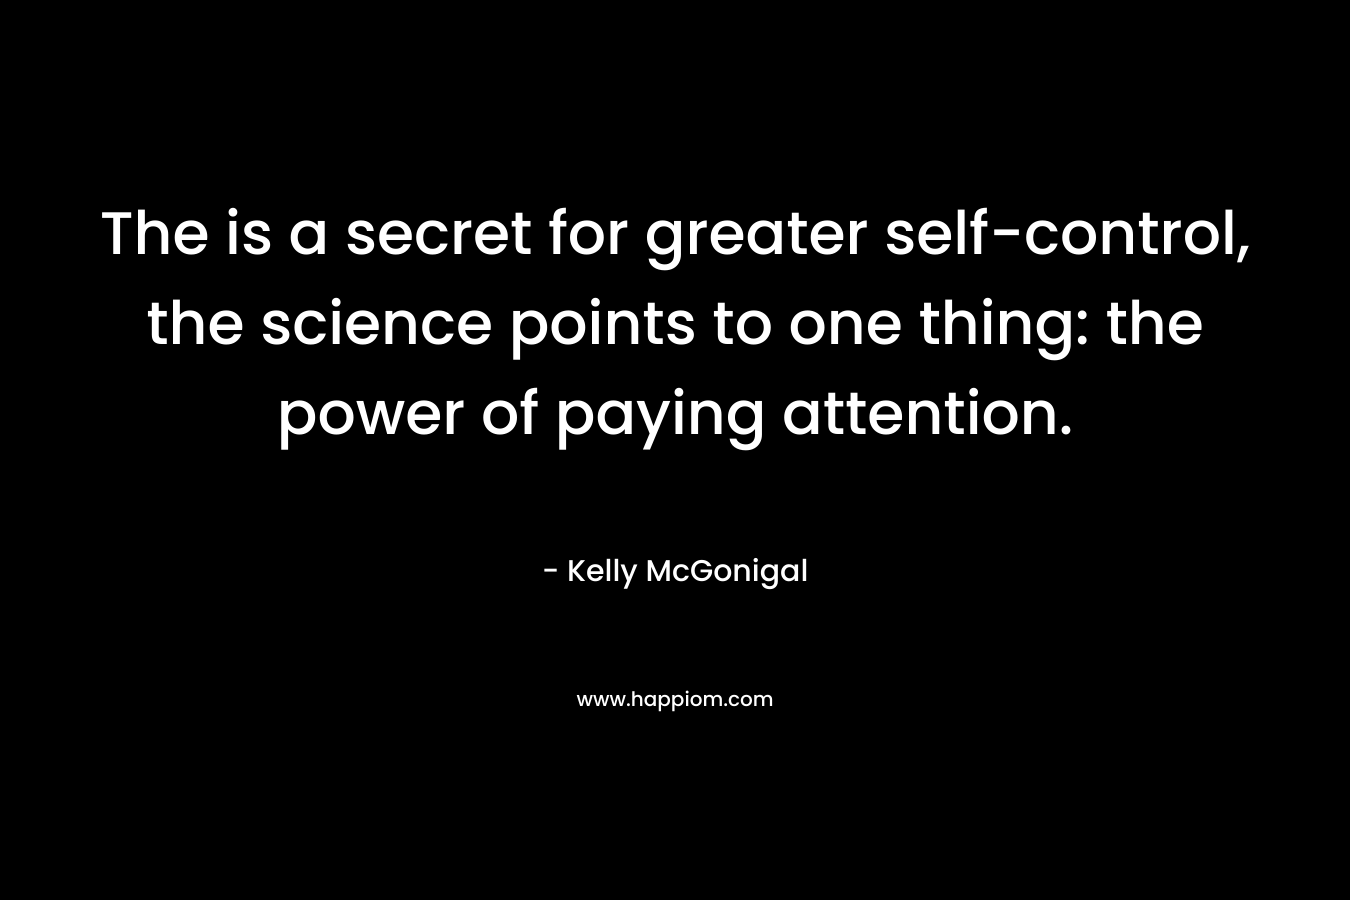 The is a secret for greater self-control, the science points to one thing: the power of paying attention.